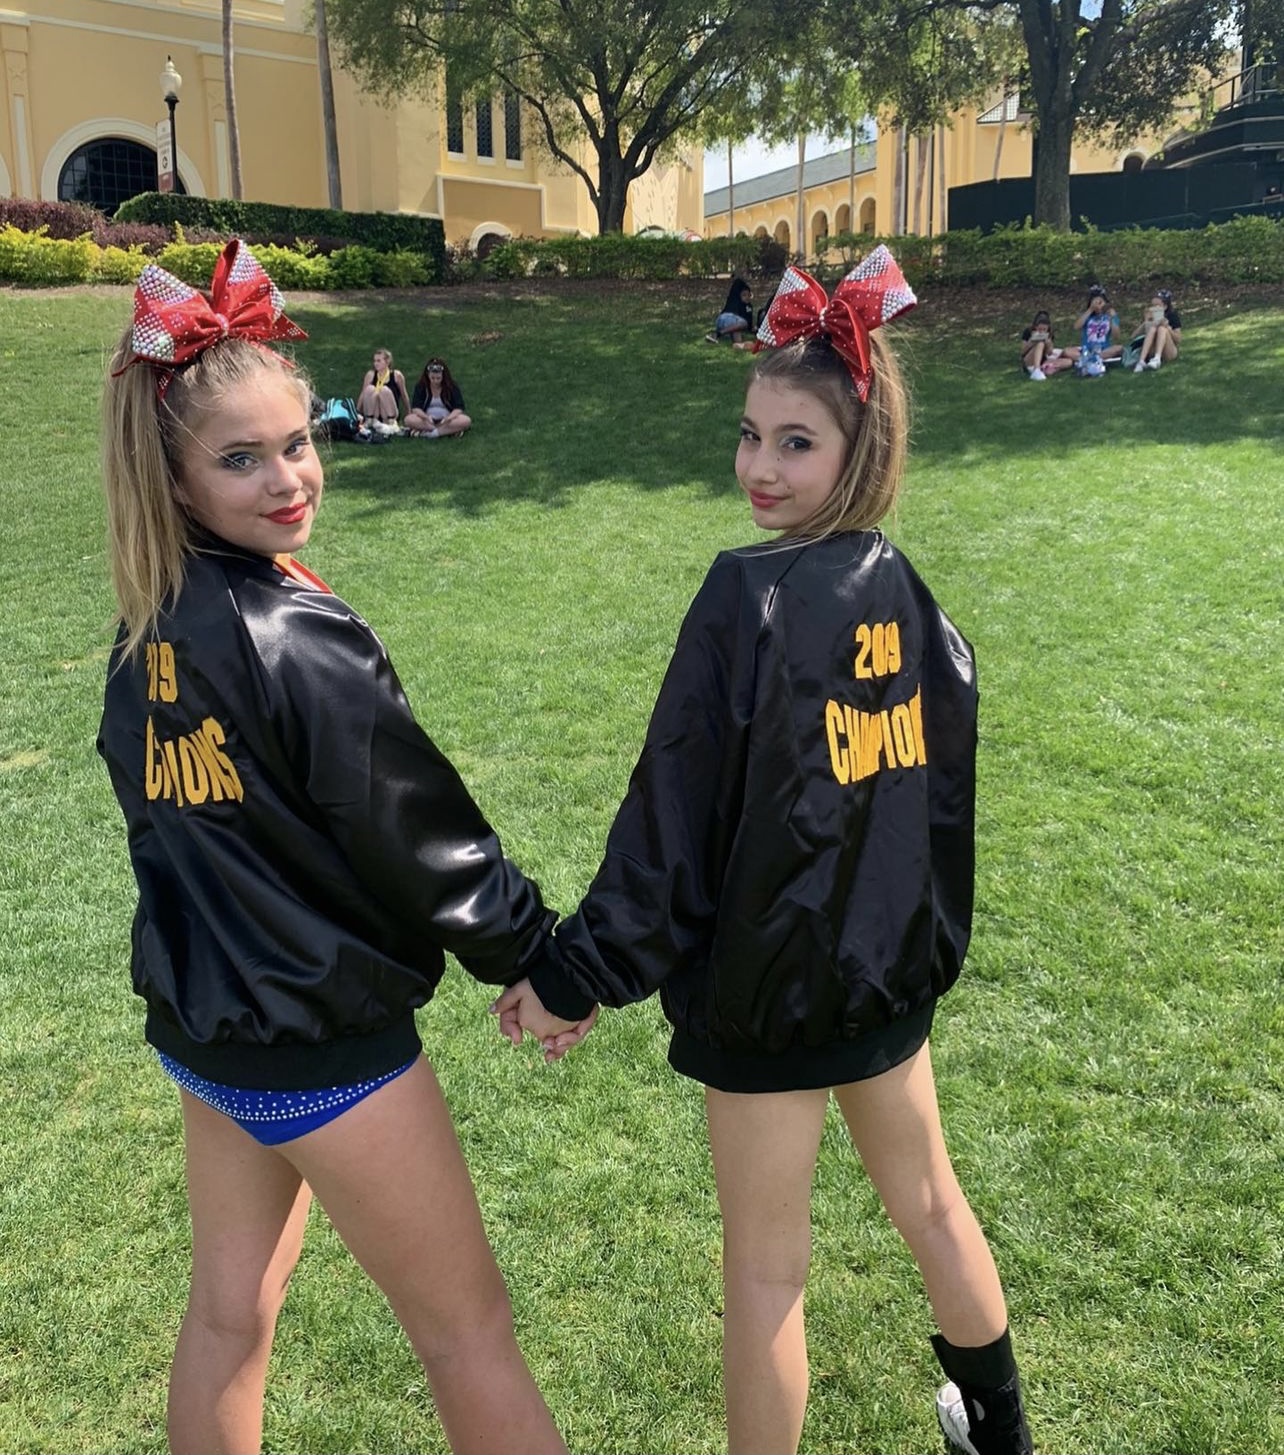 the two girls hold hands in their cheerleading outfits